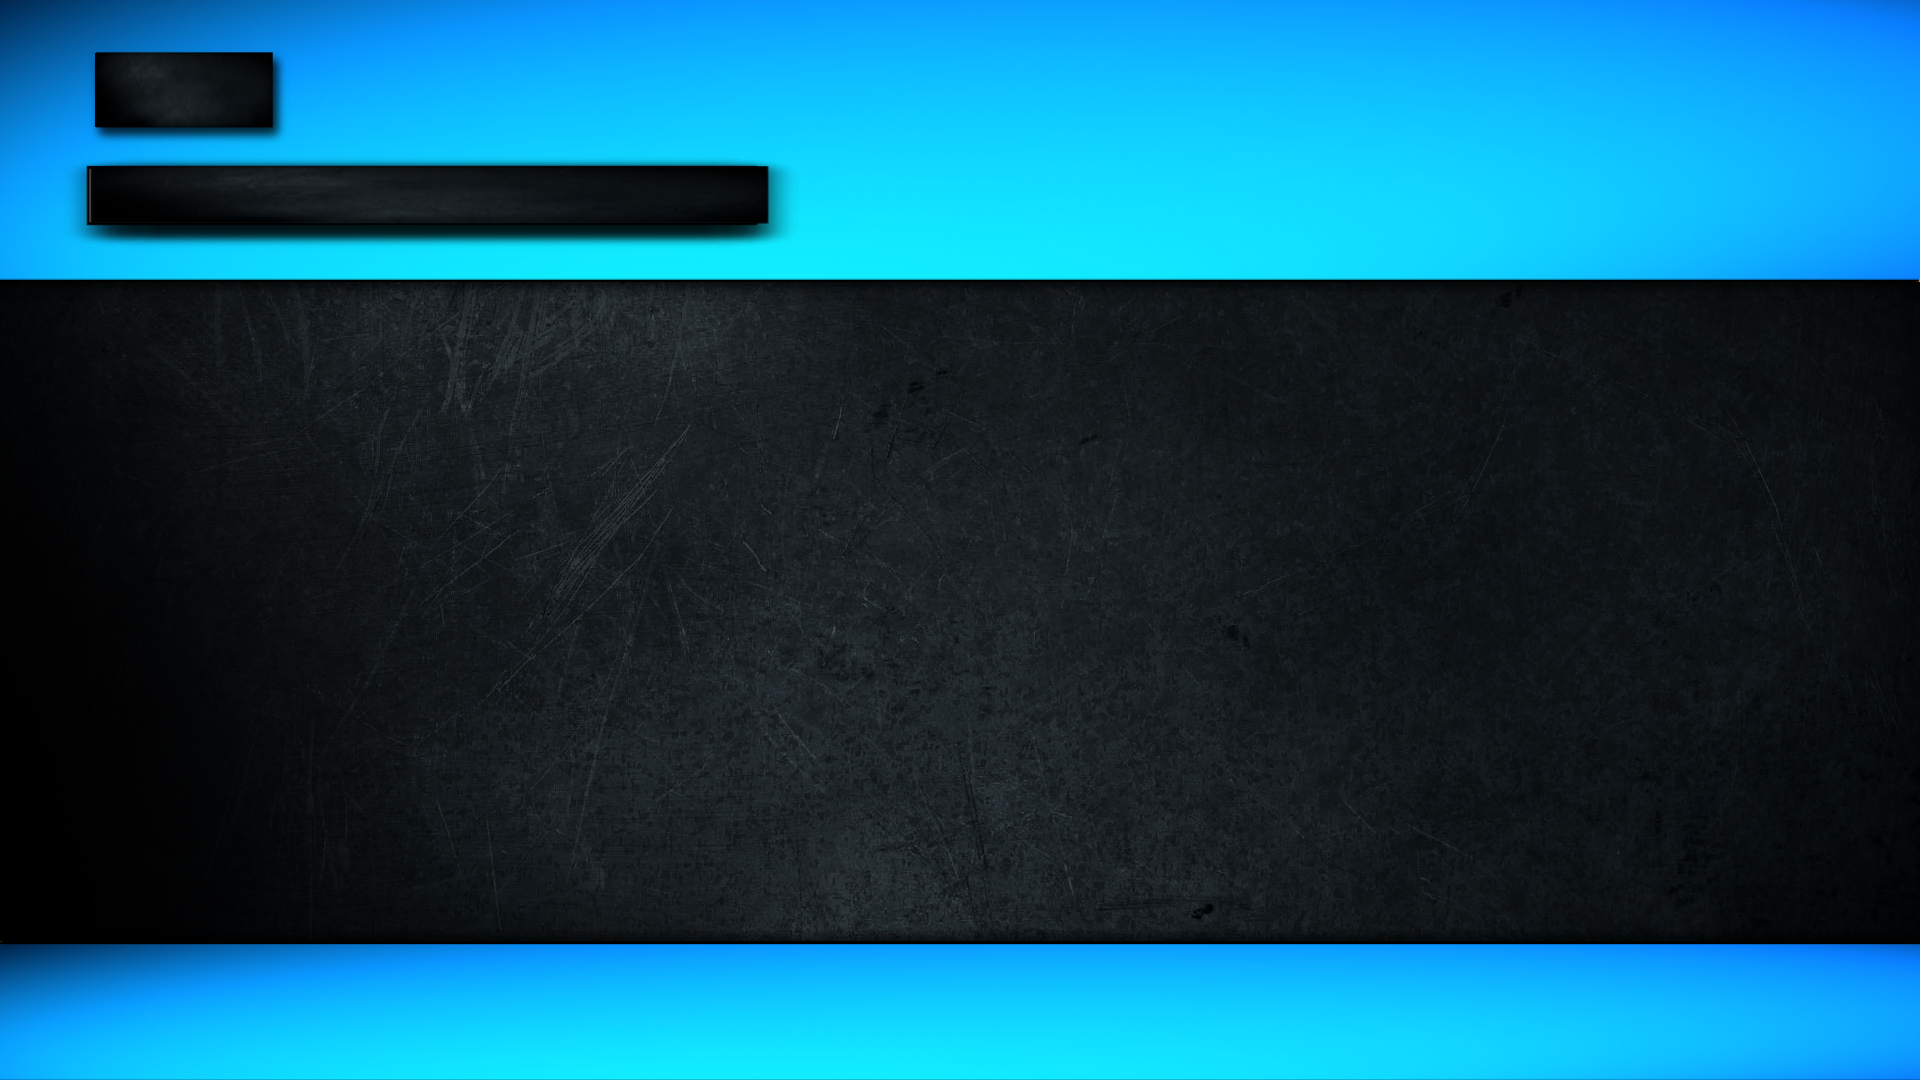 Black Metal Clean Blue Mix Xbox One Backgrounds